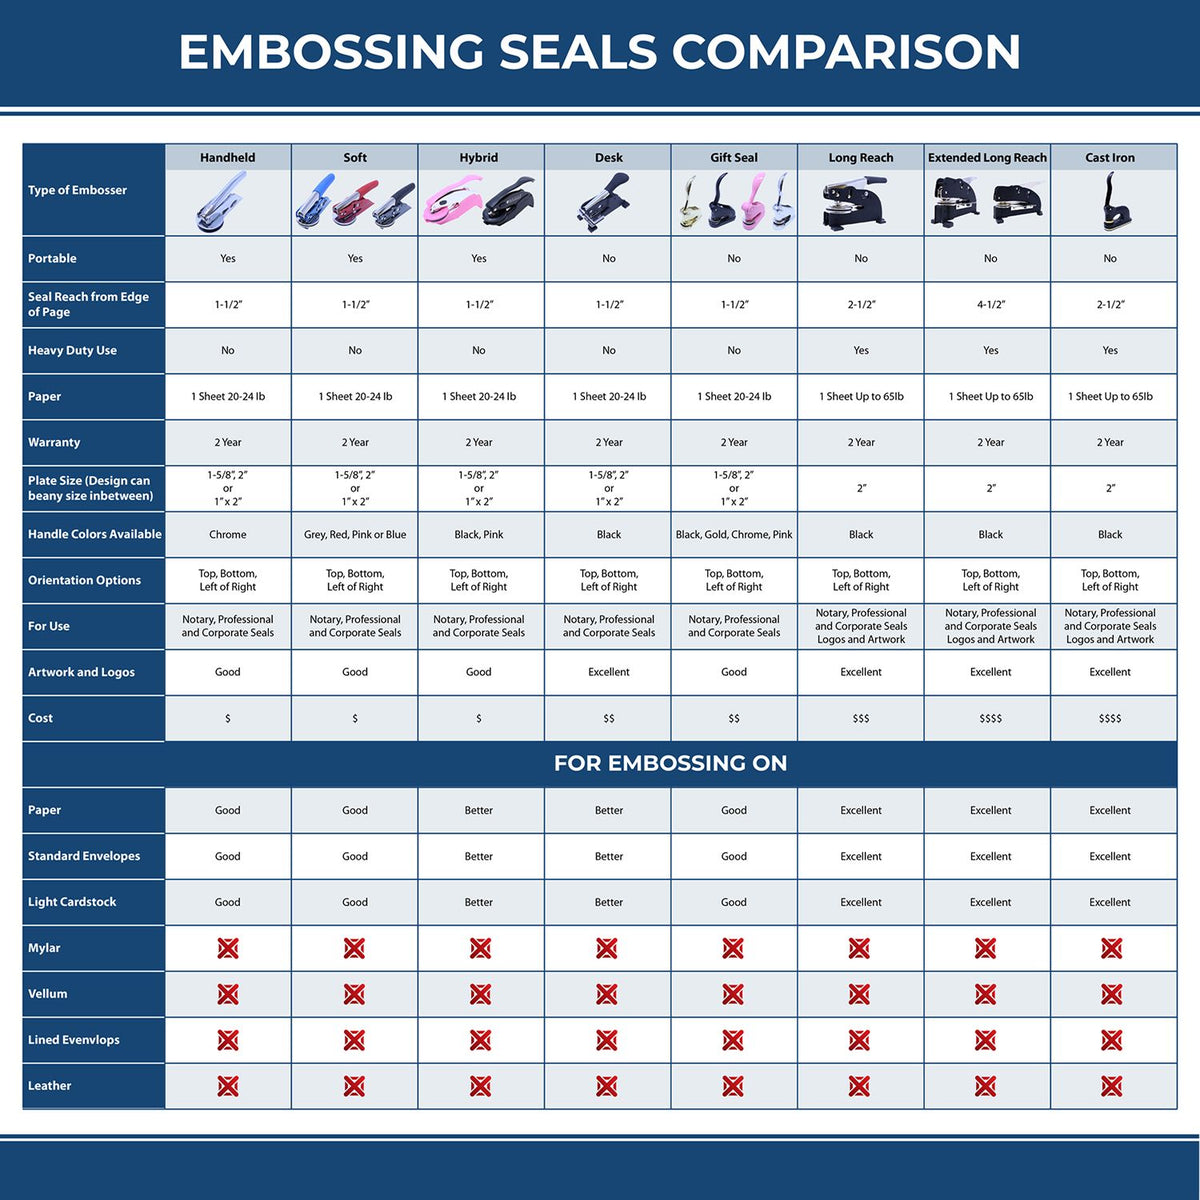 A comparison chart for the different types of mount models available for the Extended Long Reach Delaware Architect Seal Embosser.